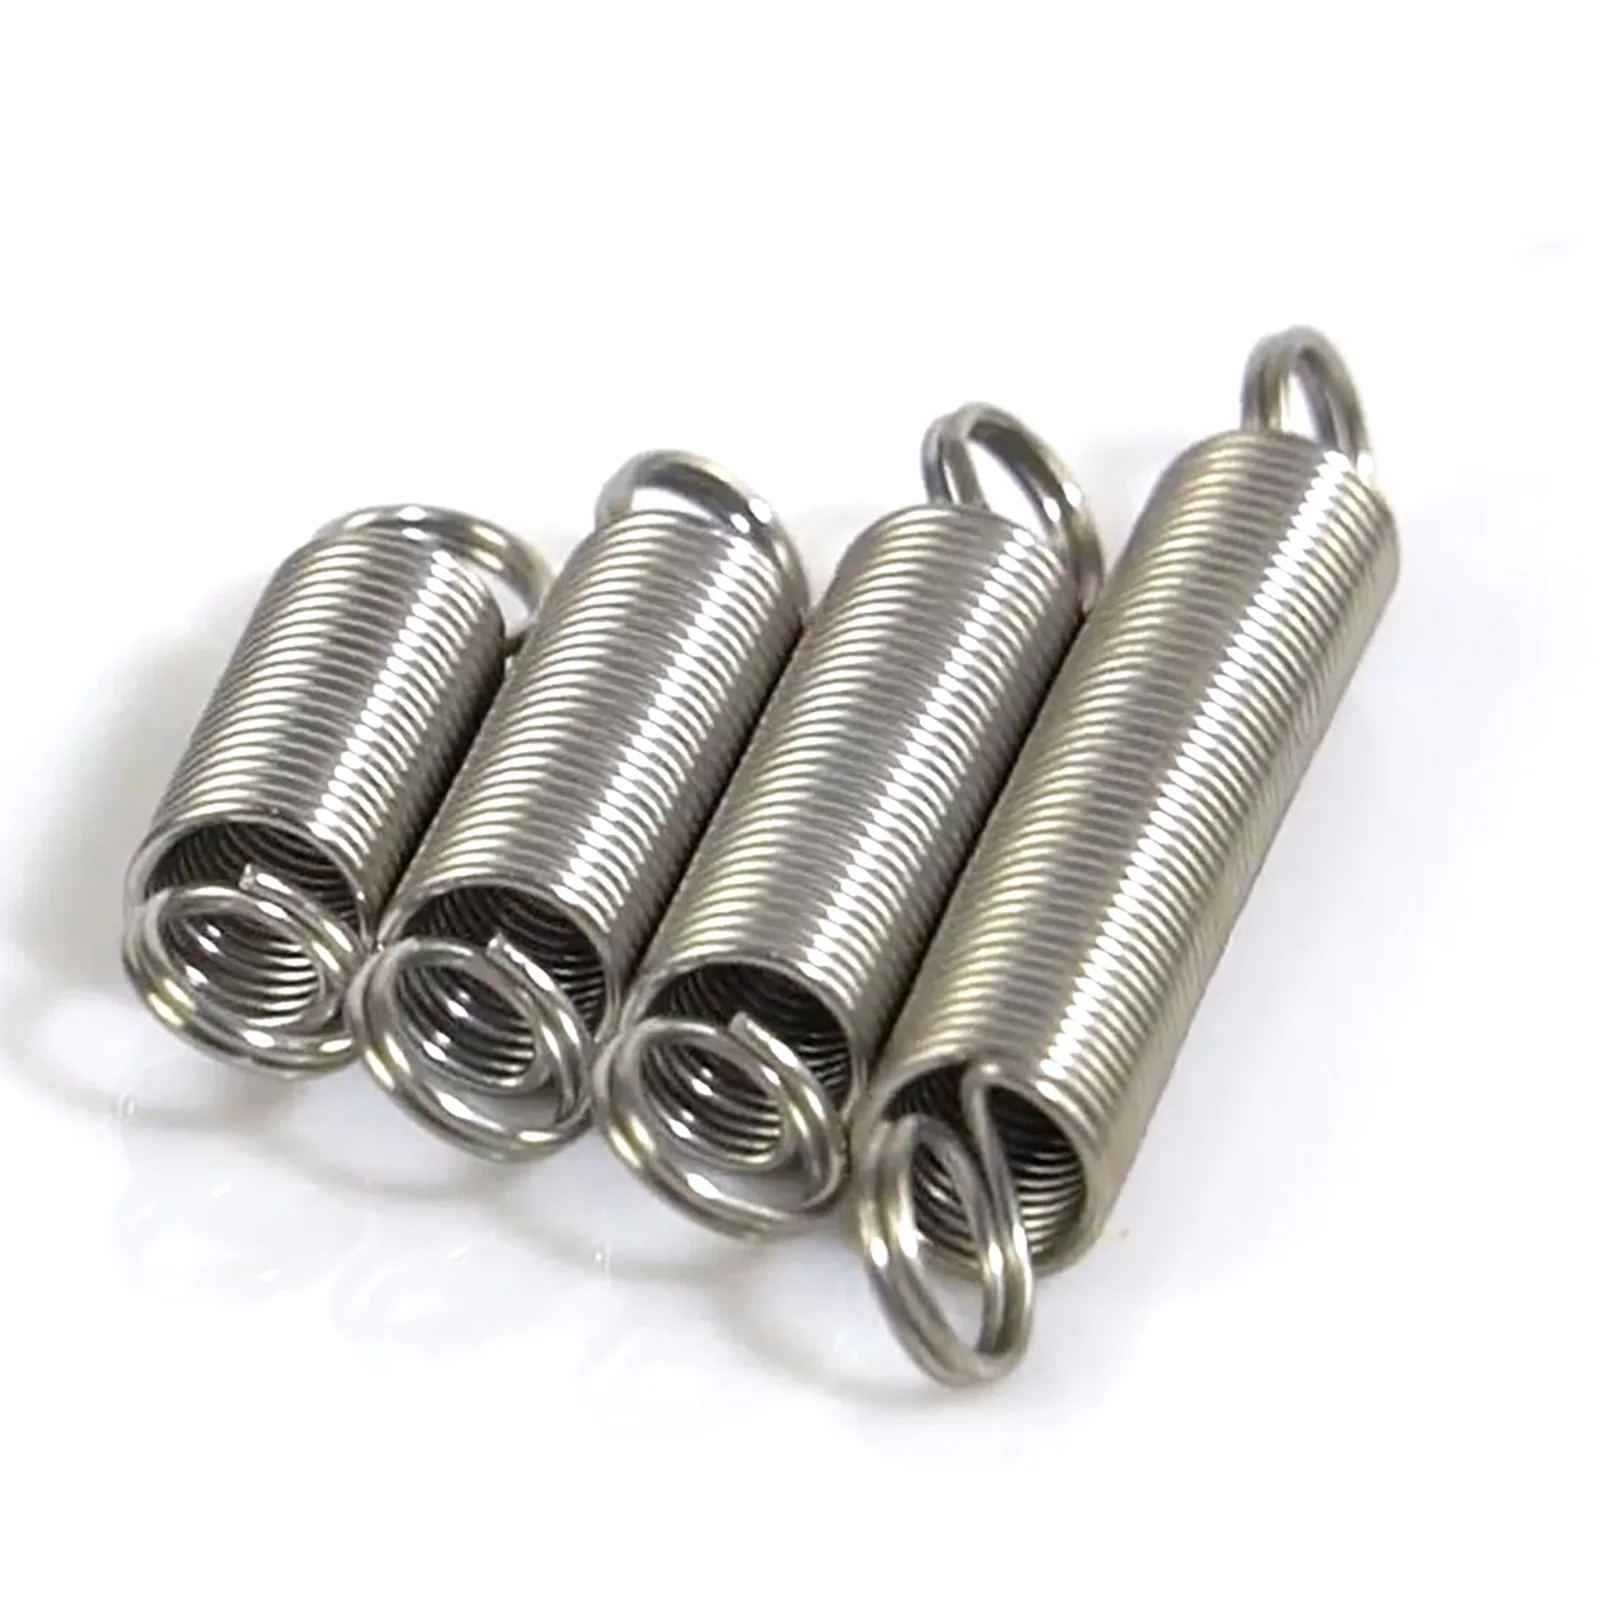 

10 Pieces, Wire Diameter 0.4mm, Outer Diameter 4mm, Length 15-60mm 304 Stainless Steel Dual Hook Small Expansion Tension Spring